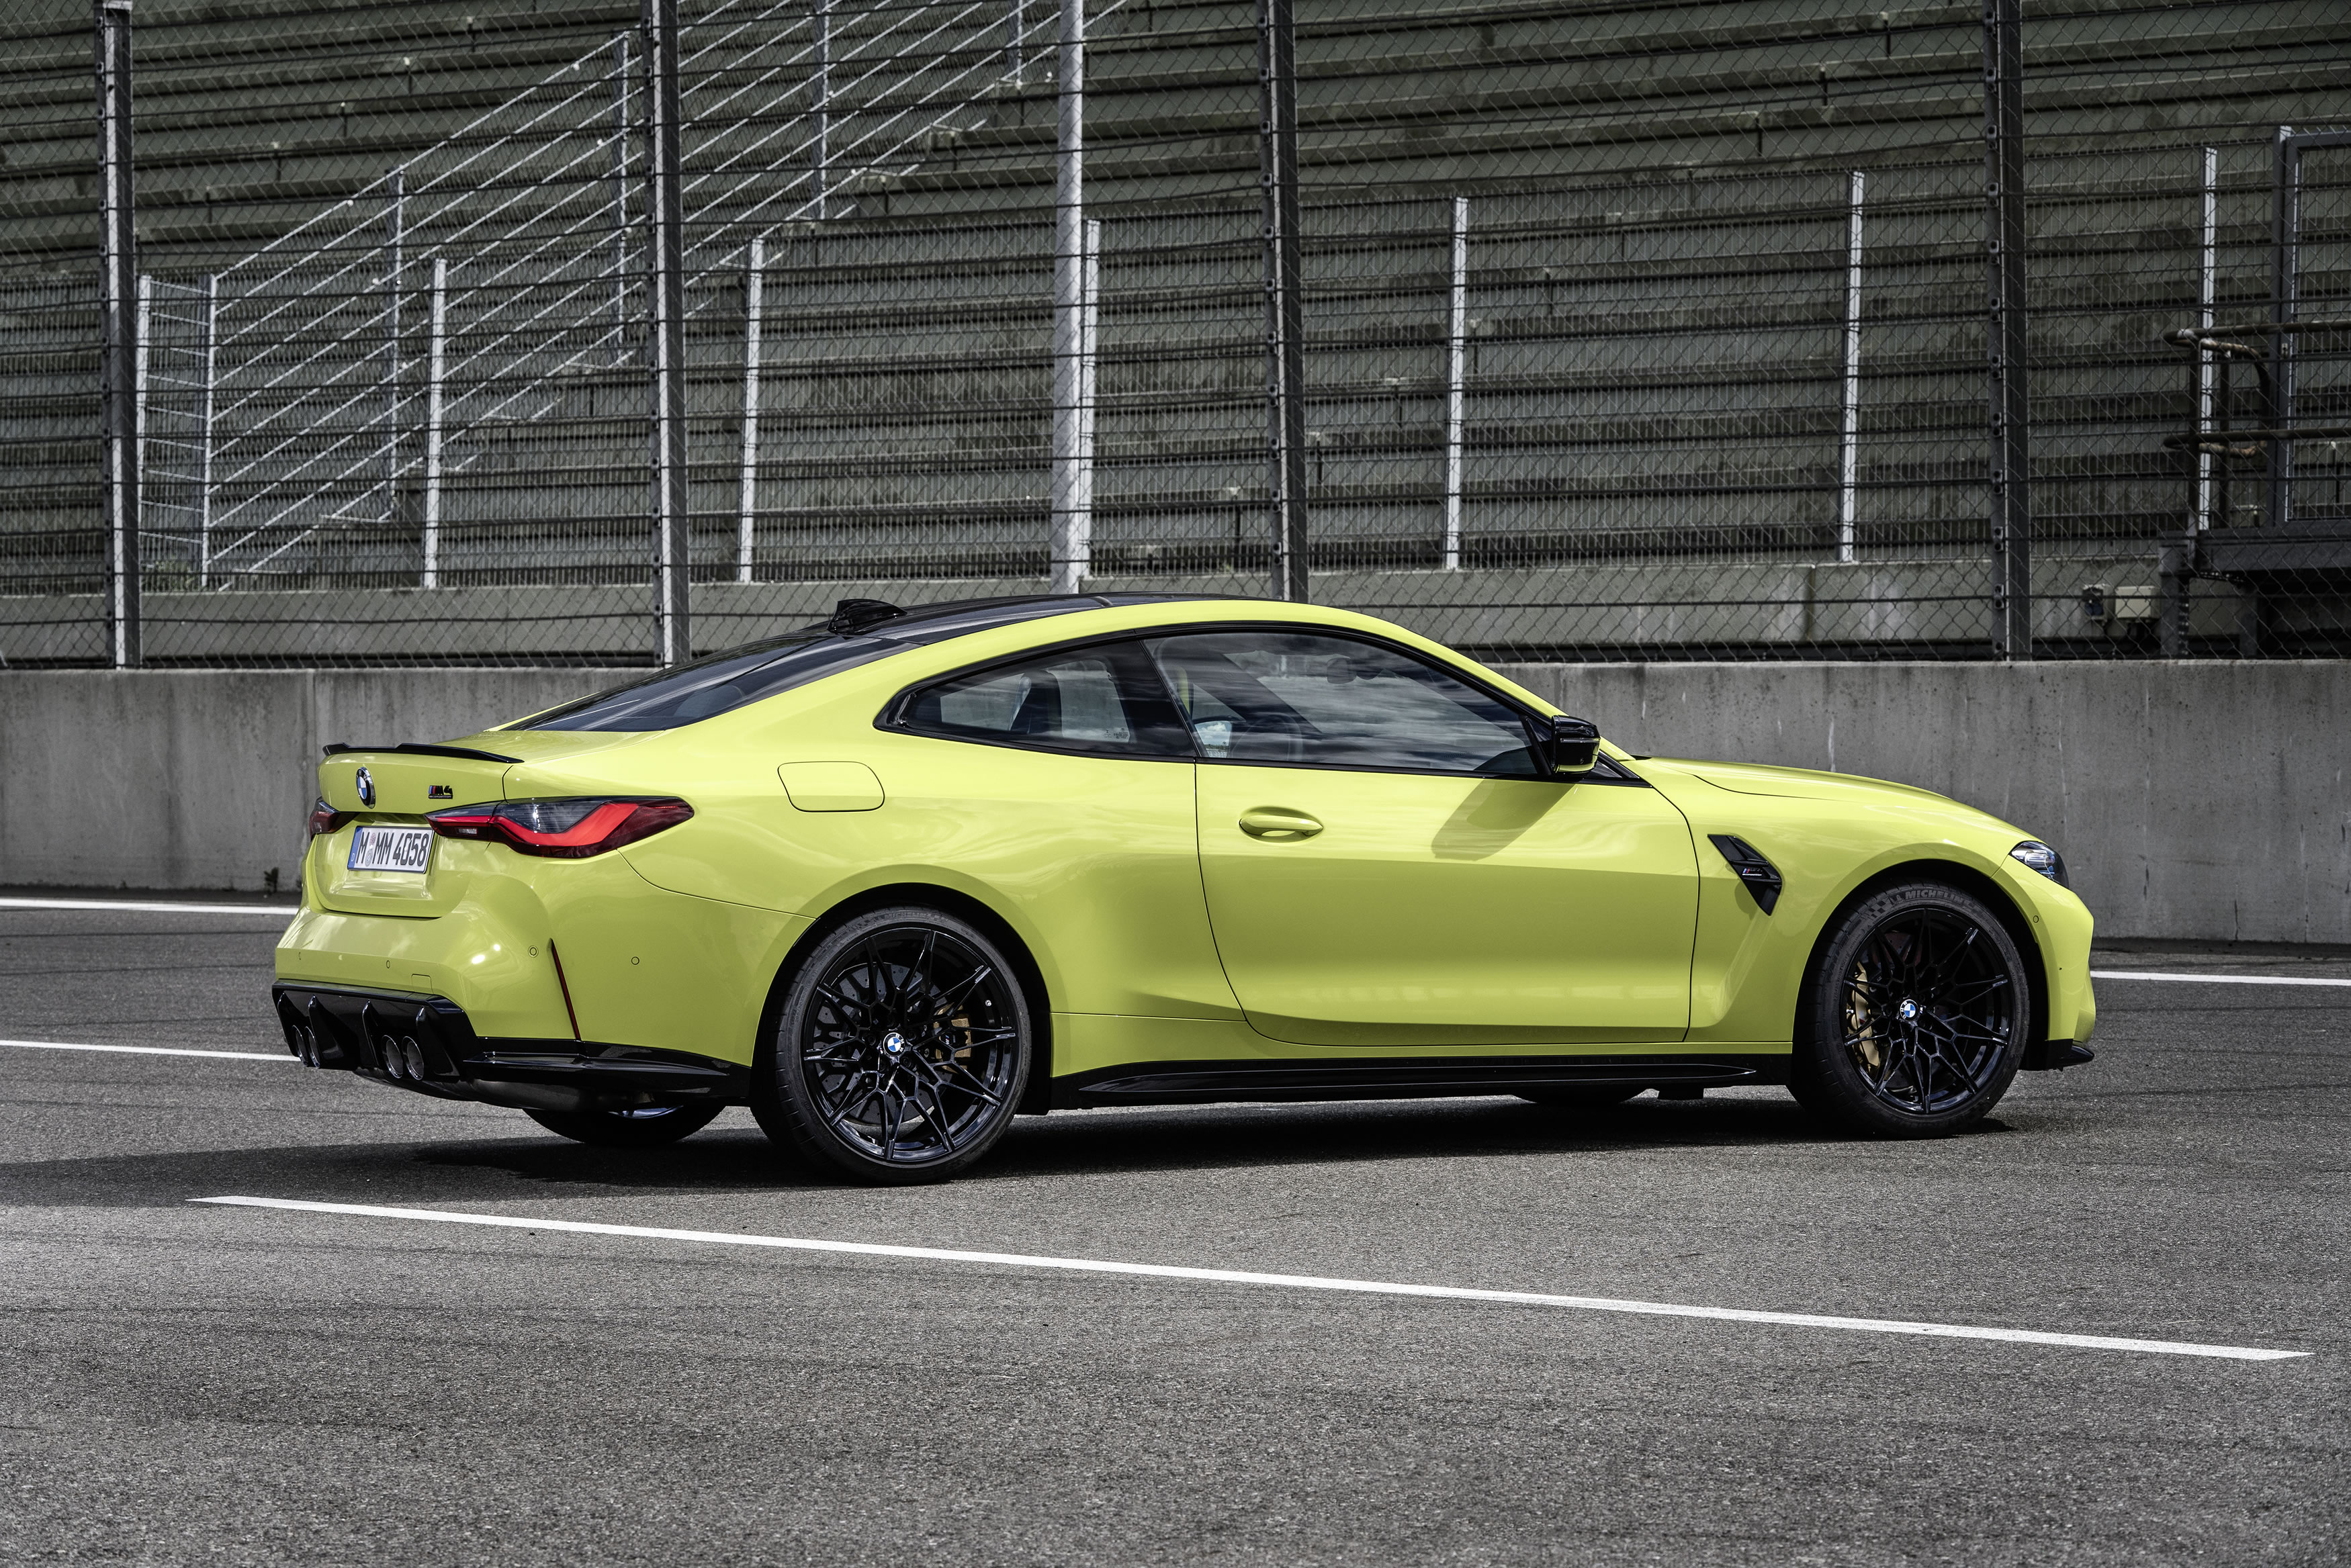 M4 competition g82. BMW m4 Coupe 2021. BMW m4 Competition 2021. BMW m4 купе 2021. BMW m4 Competition 2020.